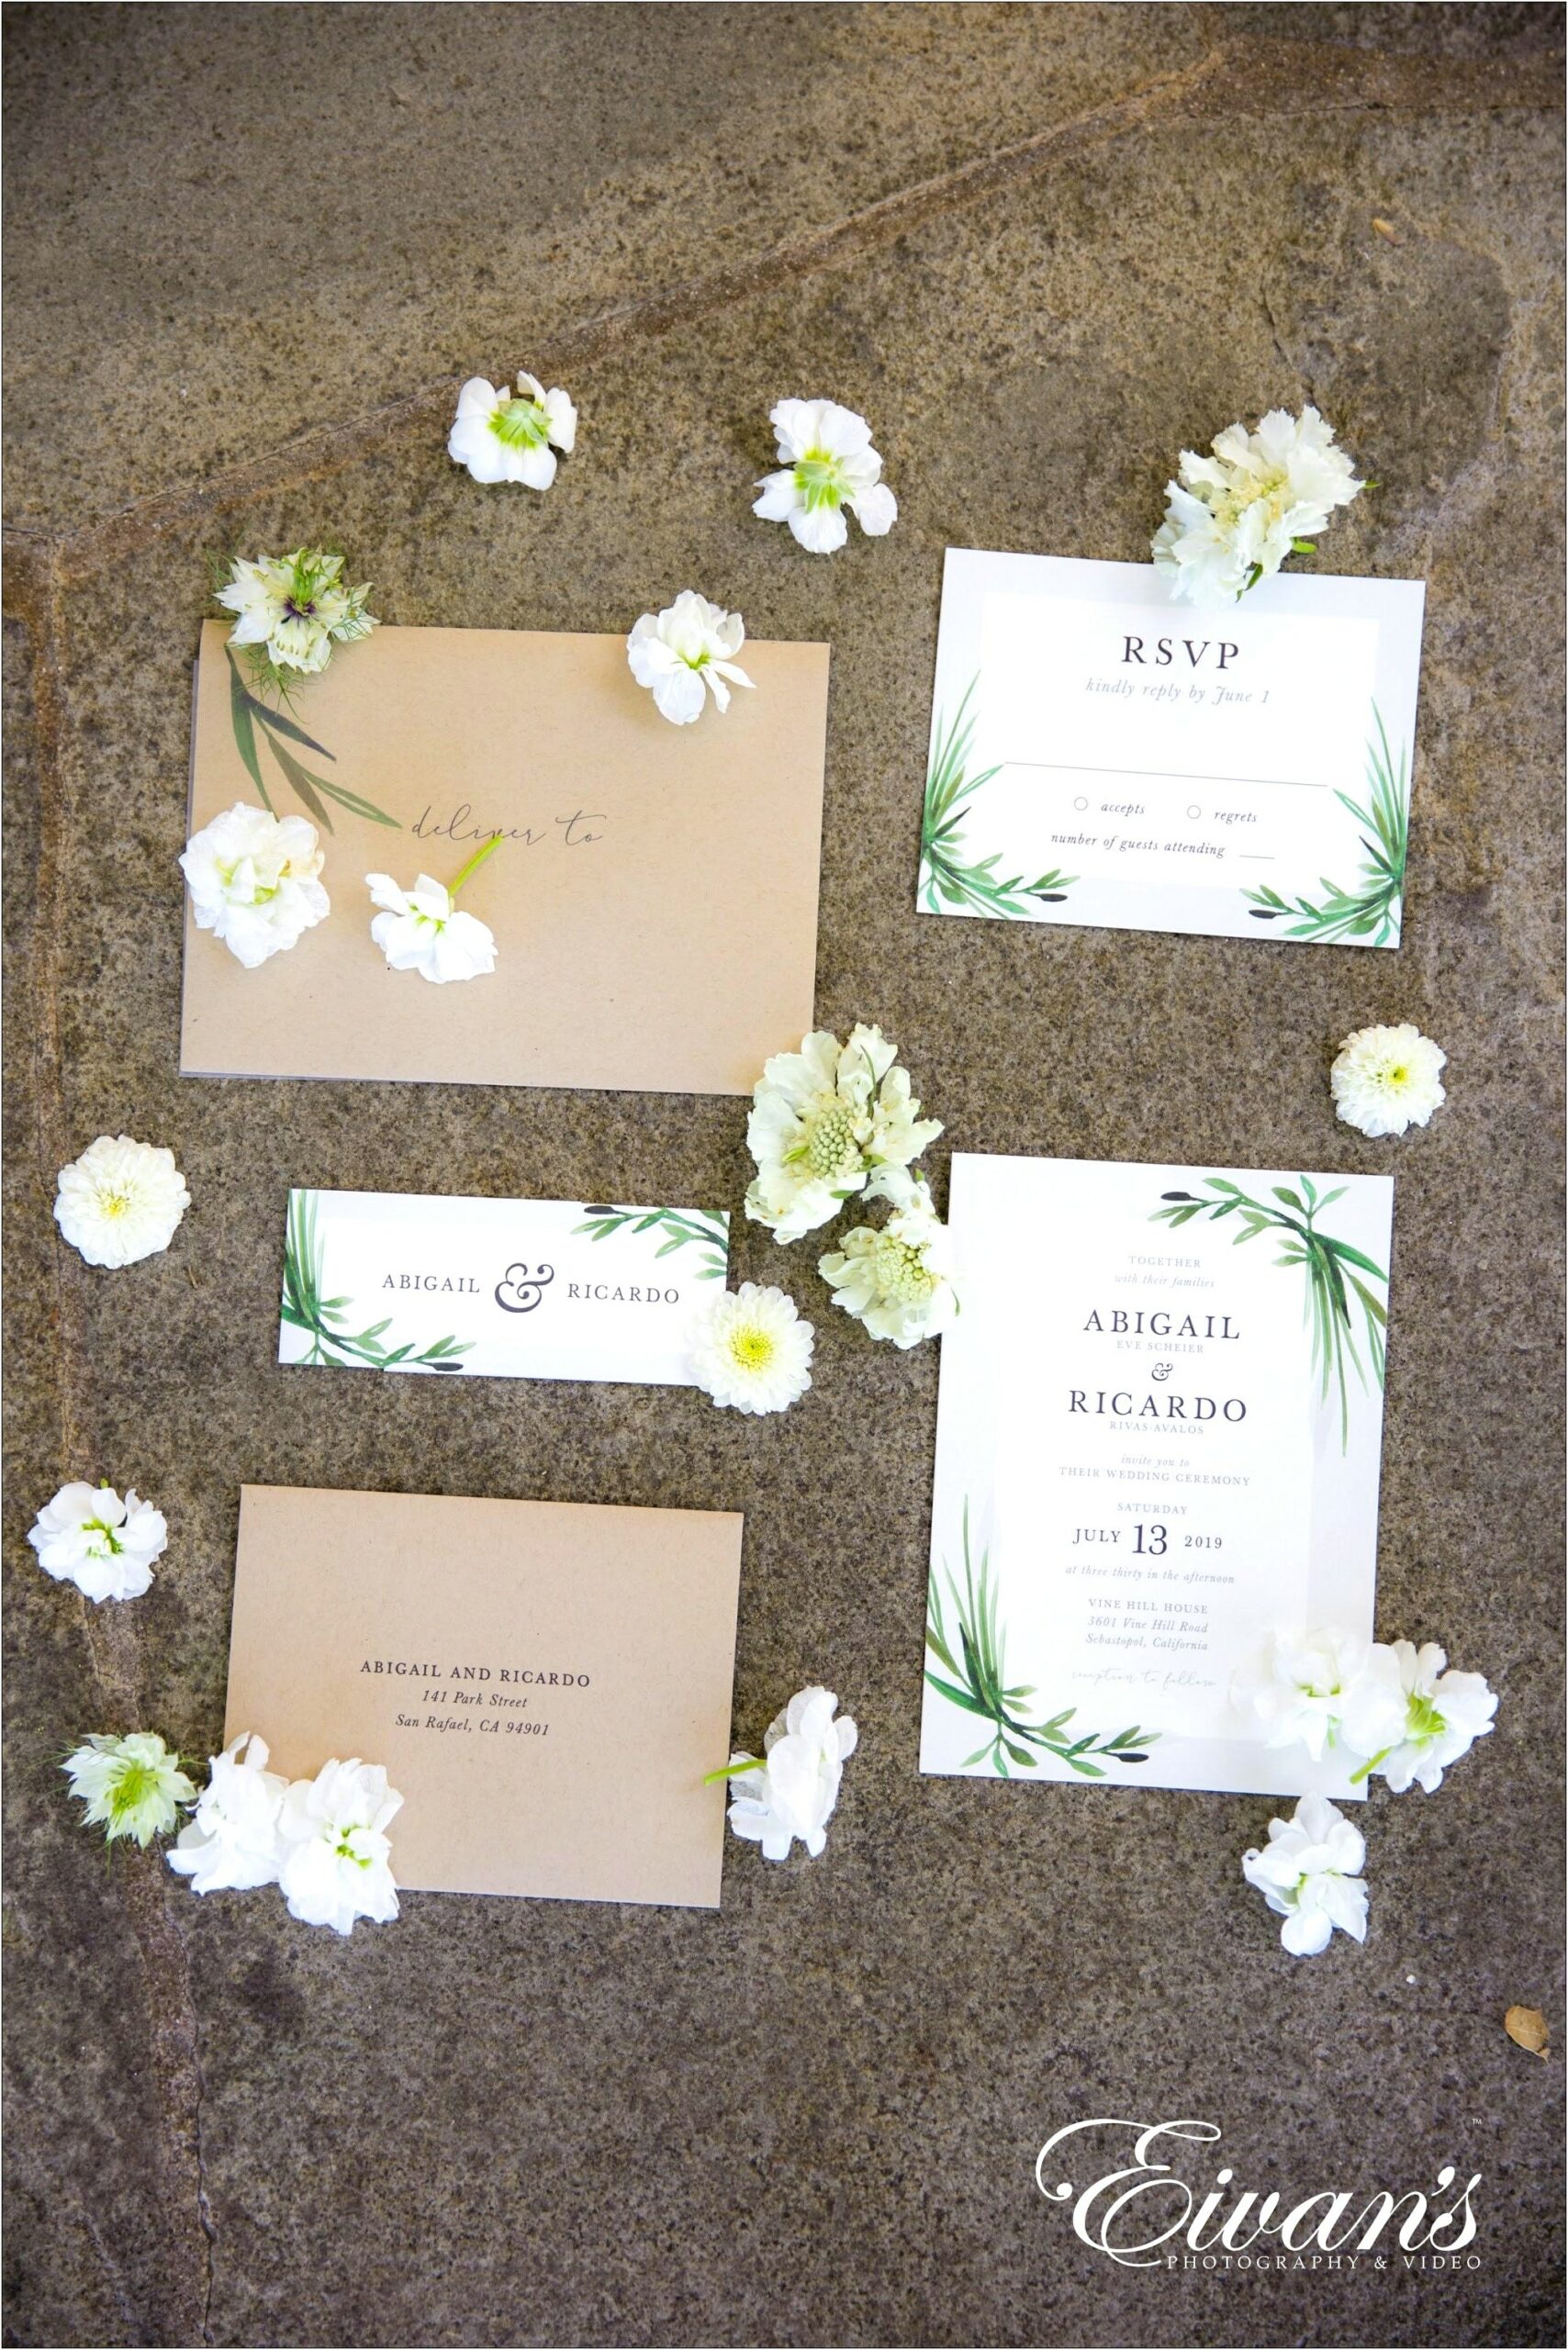 Addressing Wedding Invitations To Include Family